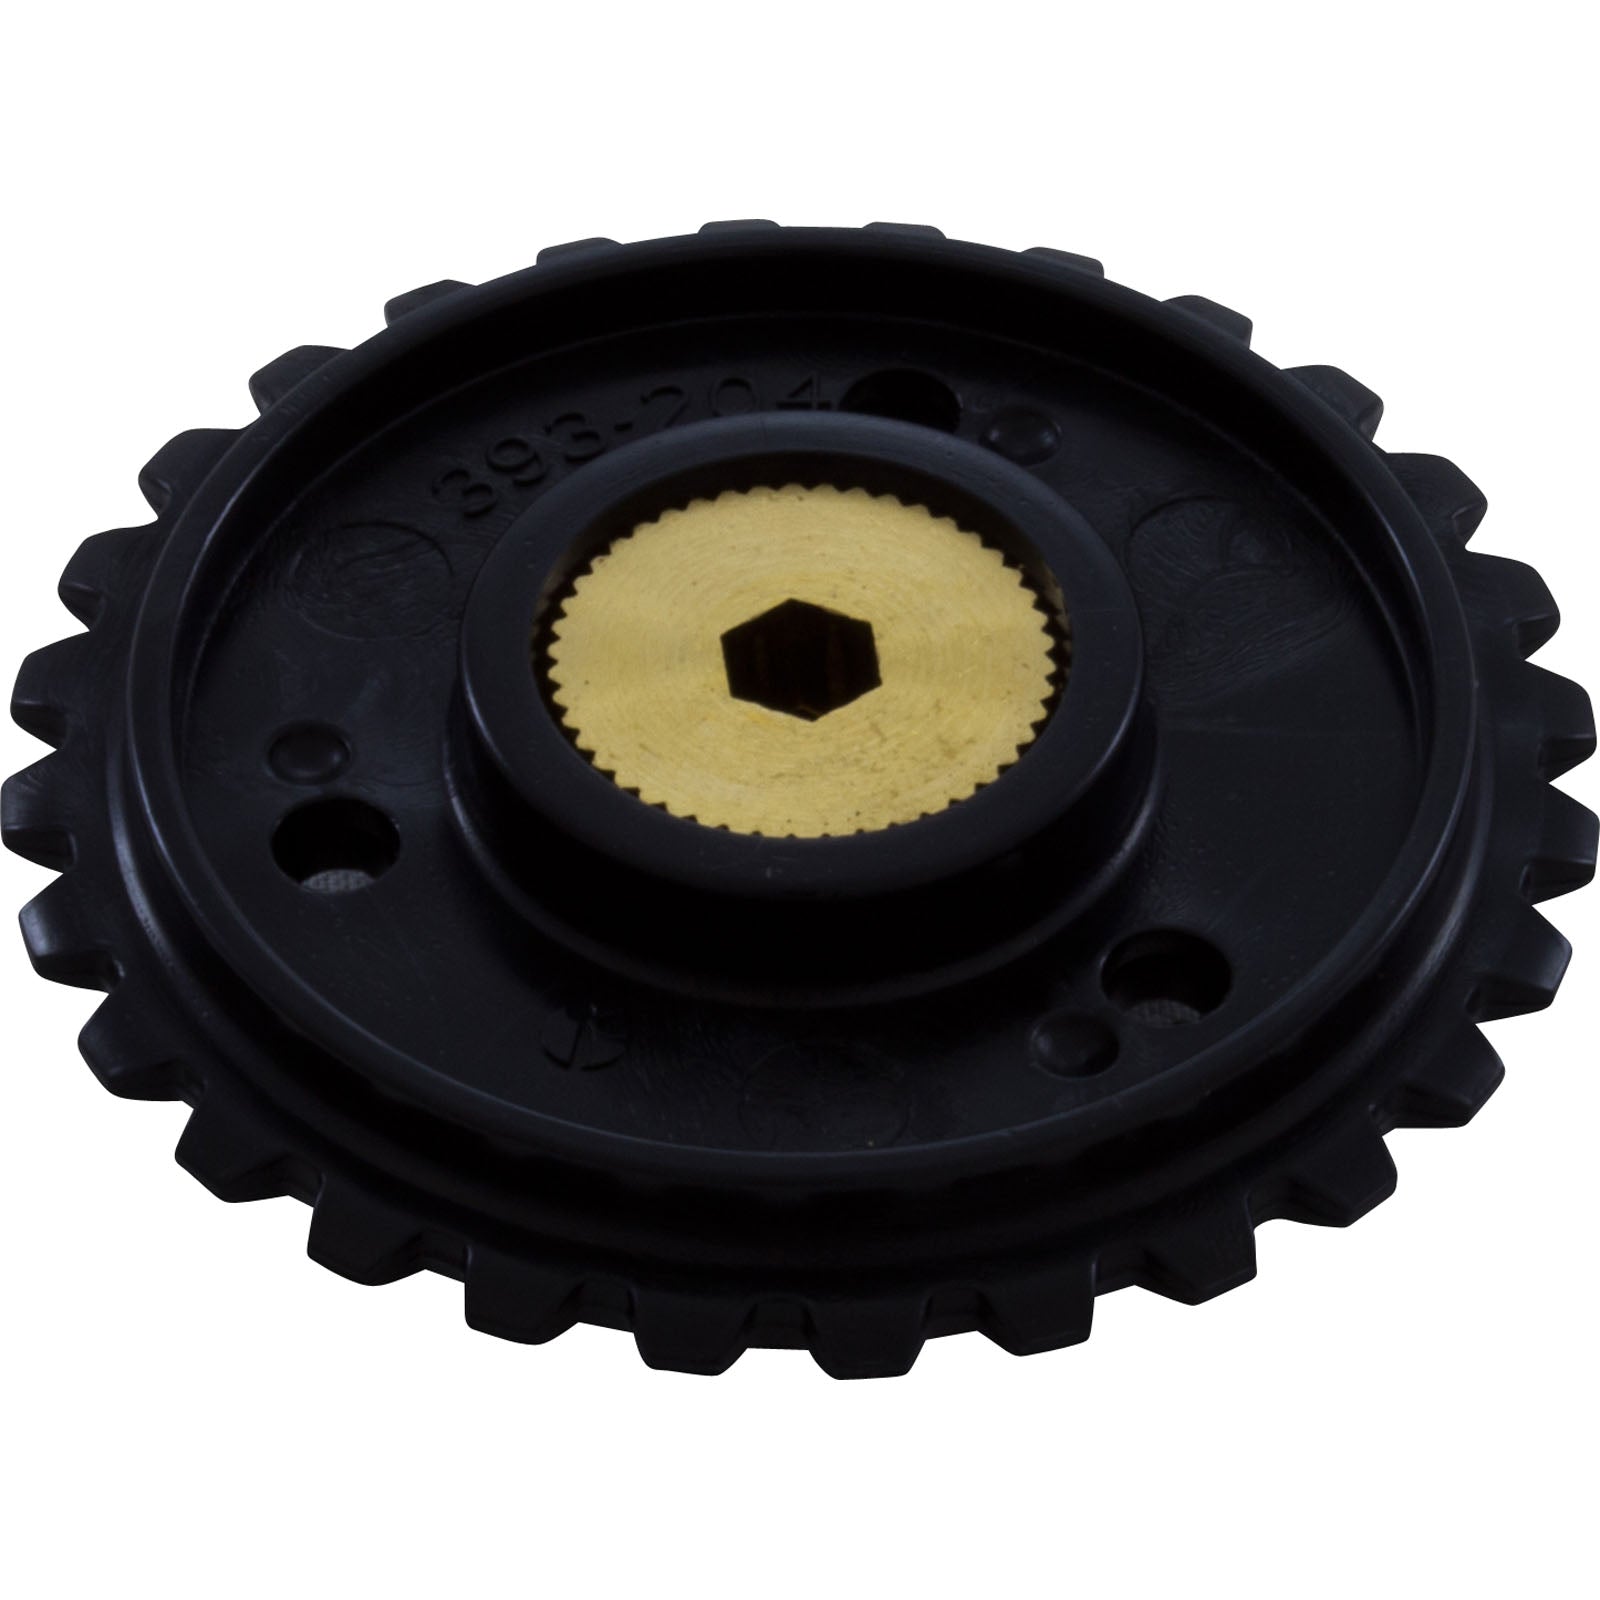 Zodiac/Polaris R0547500 Drive Sprocket Assembly for 3900 Sport Robotic Pool Cleaner